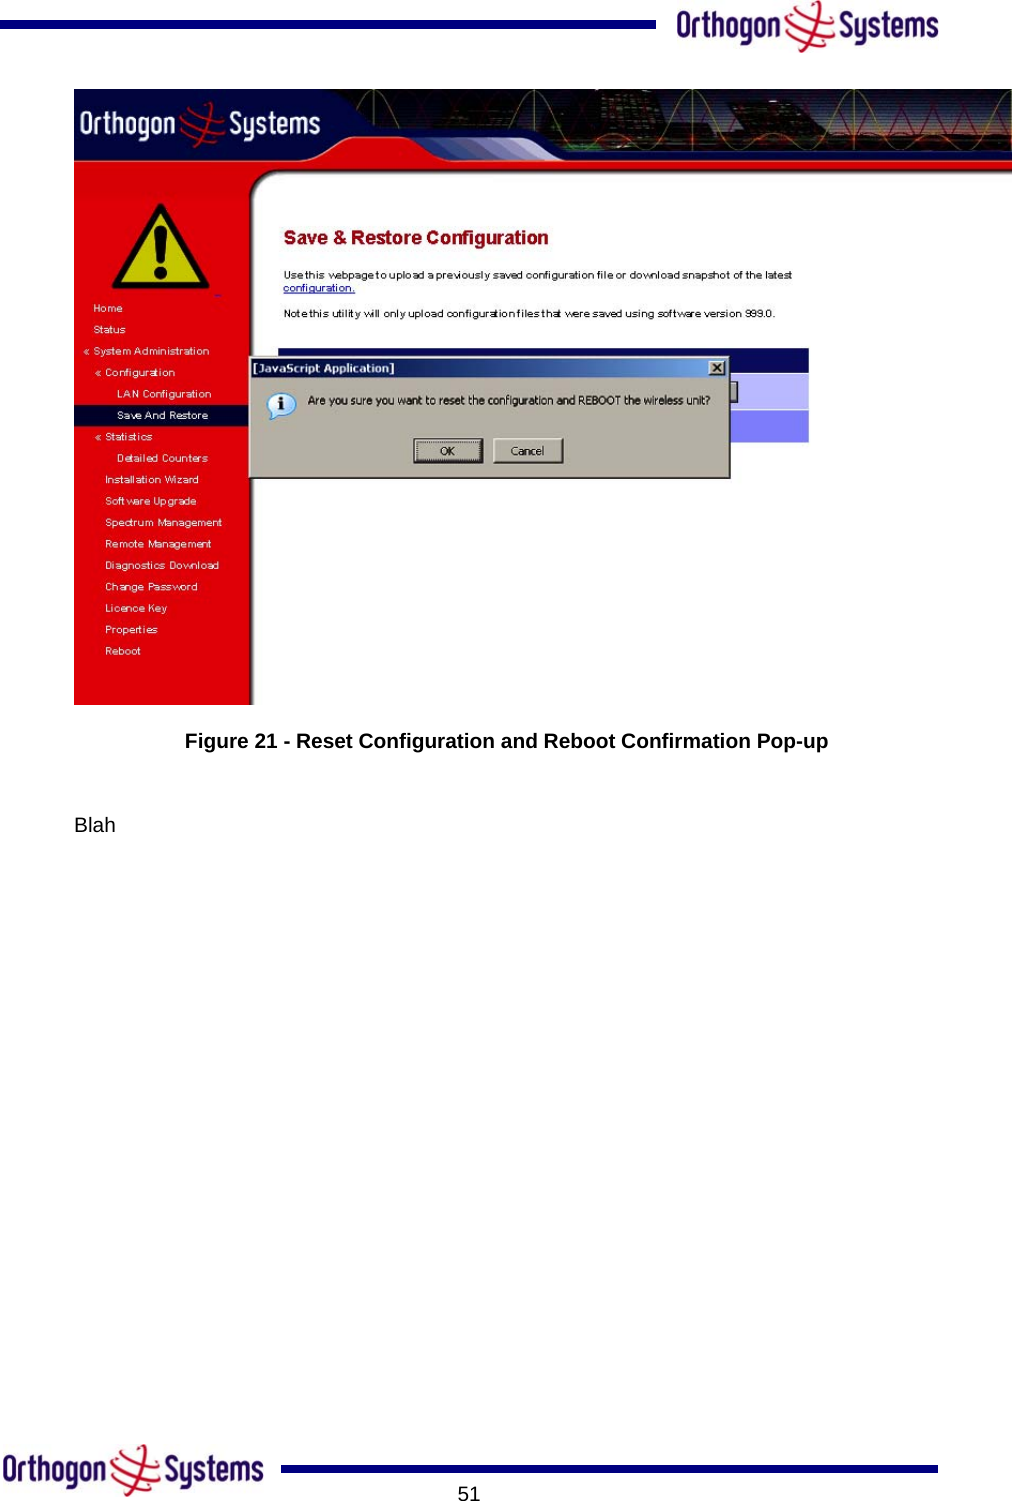       51 Figure 21 - Reset Configuration and Reboot Confirmation Pop-up  Blah   